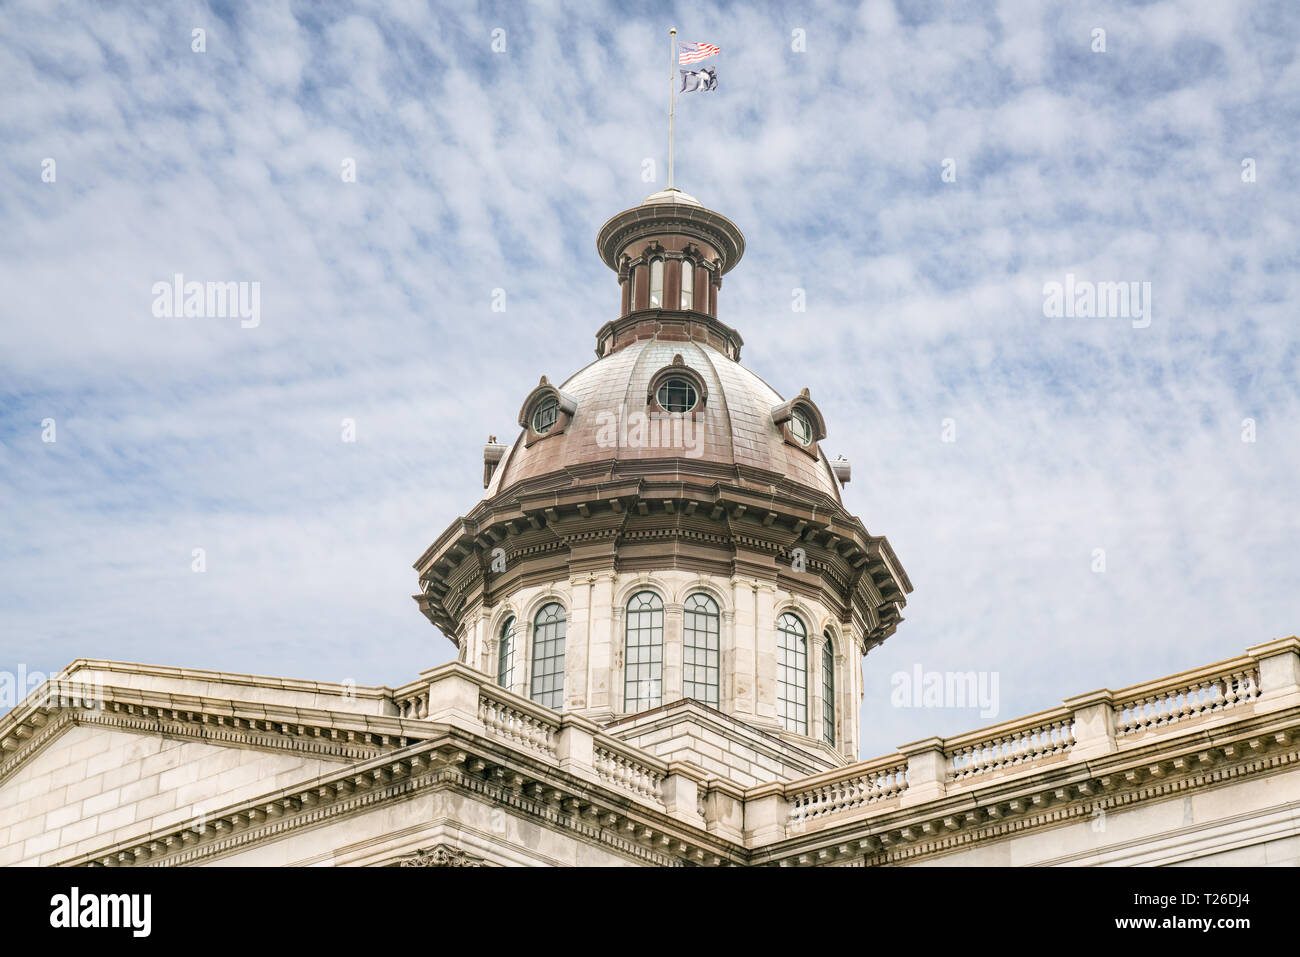 Dome of the South Carolina Capitol Building in Columbia, SC Stock Photo